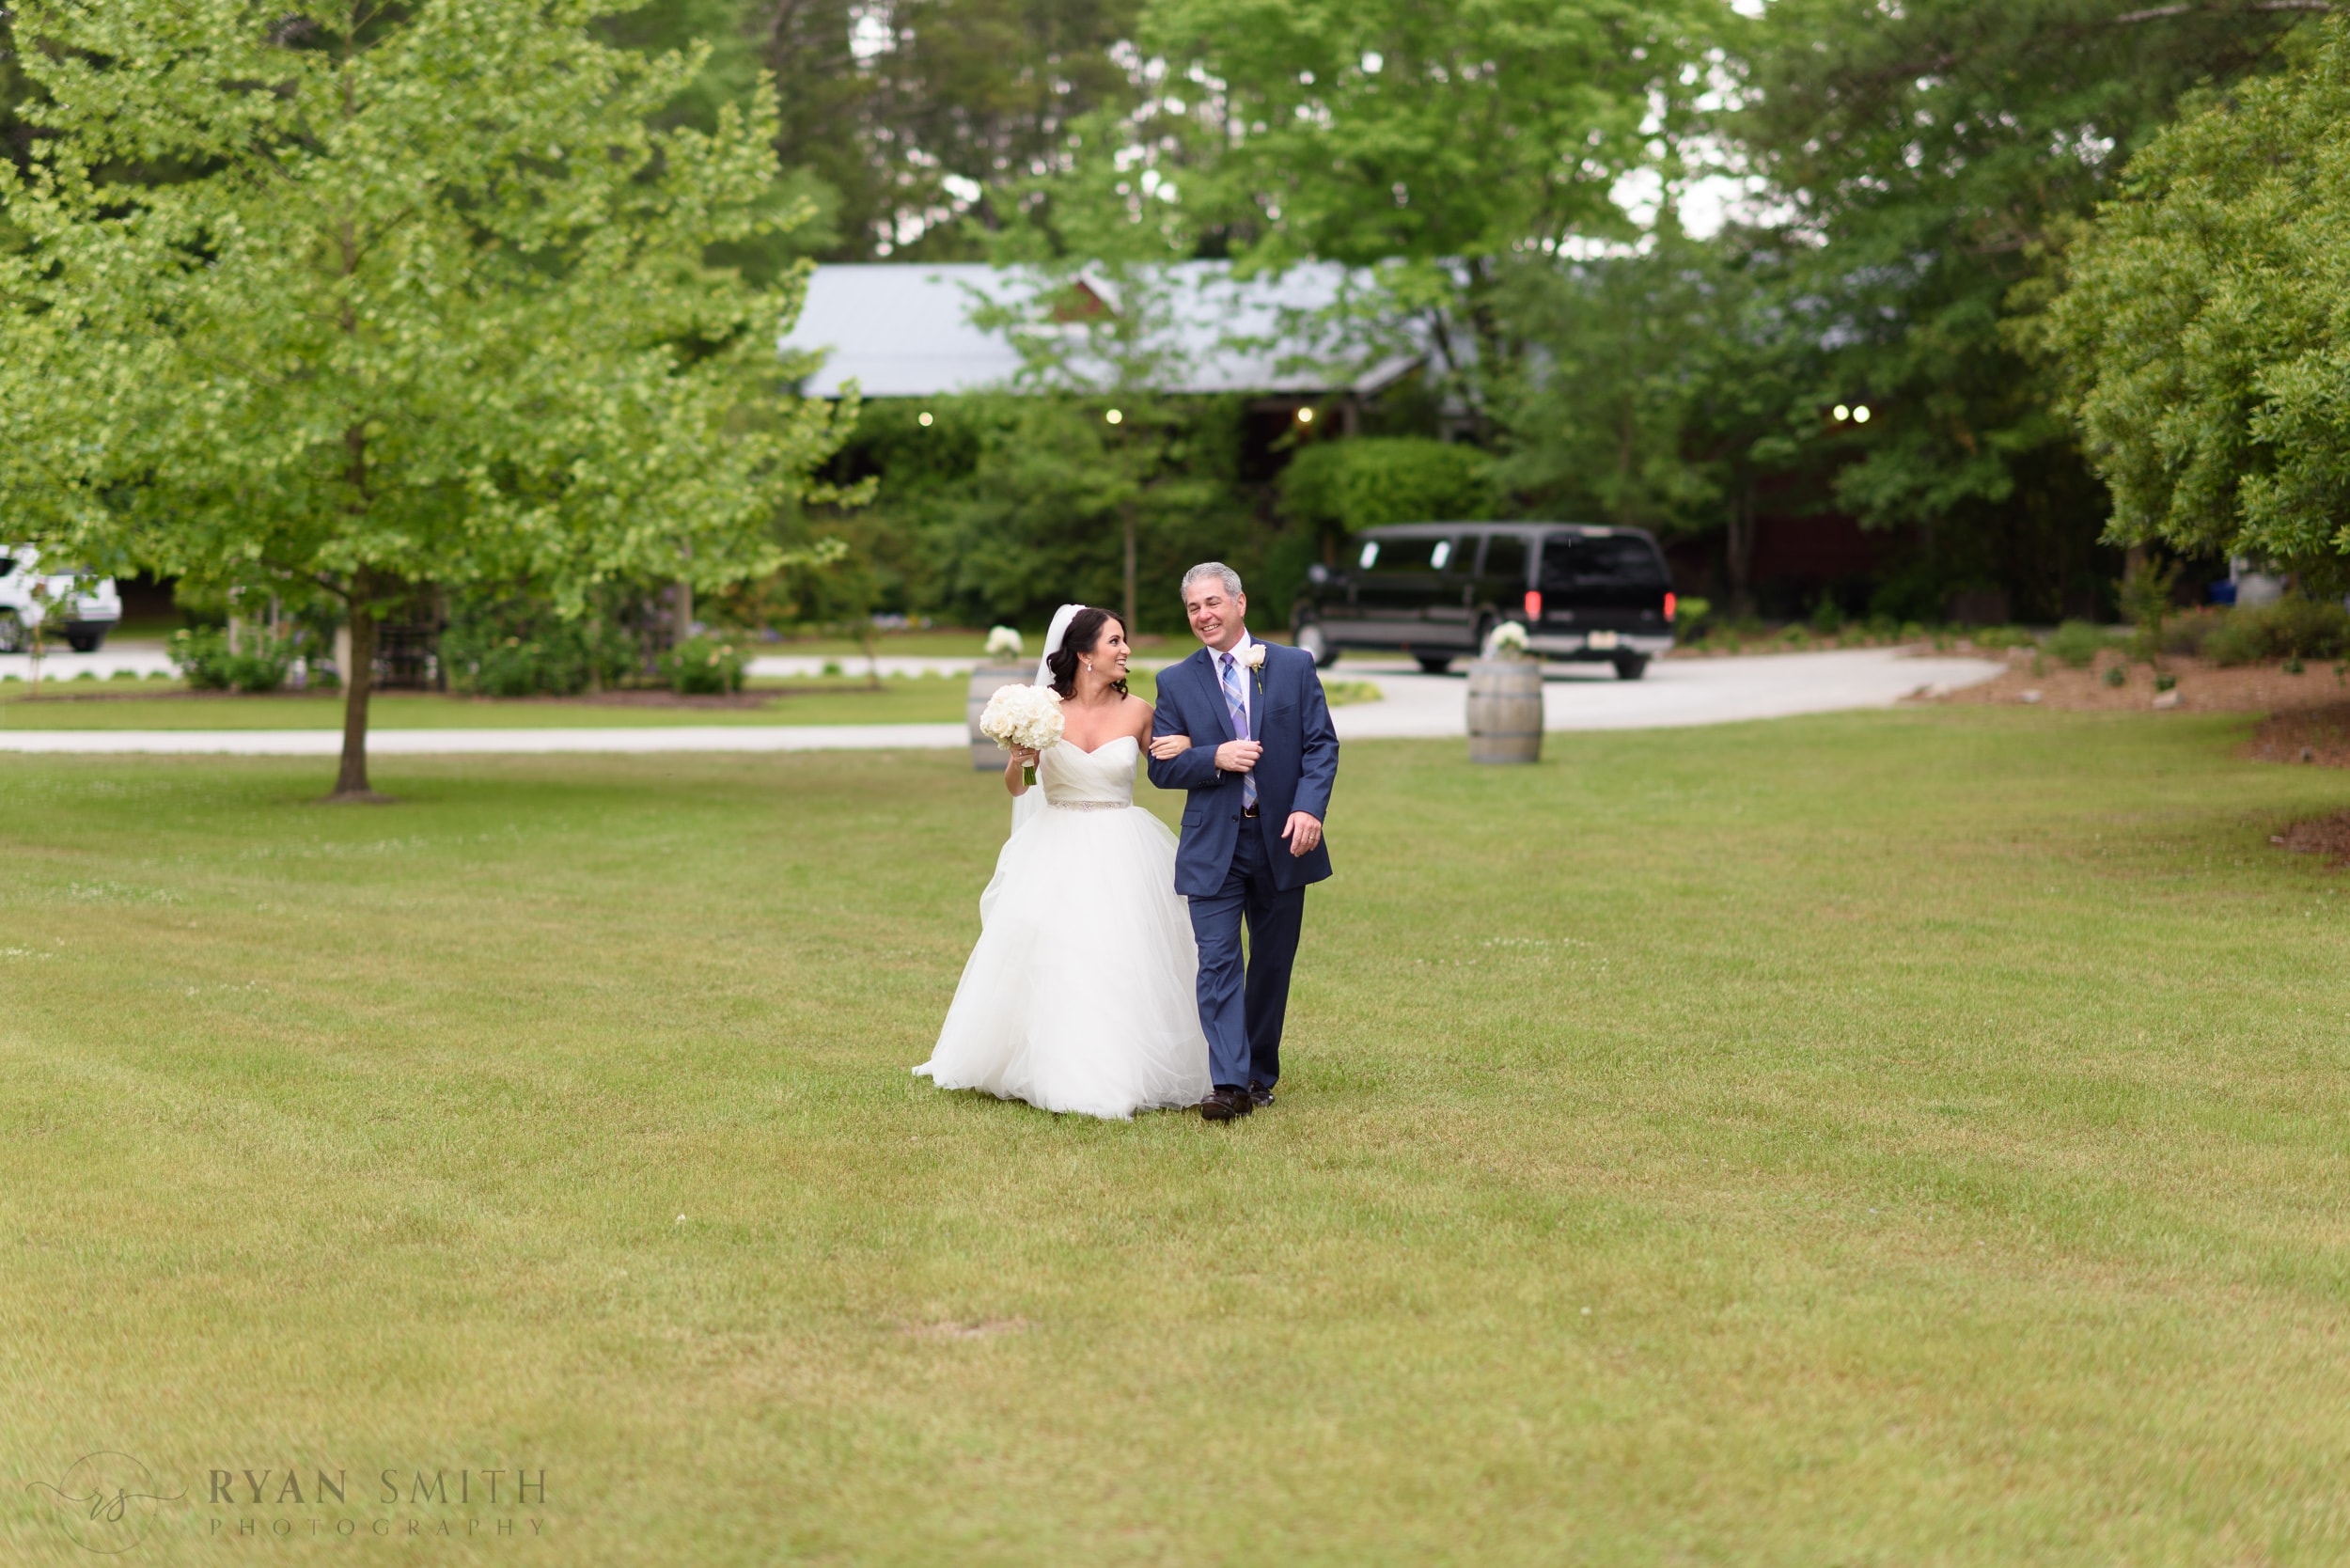 Bride and father walking down the lawn - La Belle Amie Vineyard